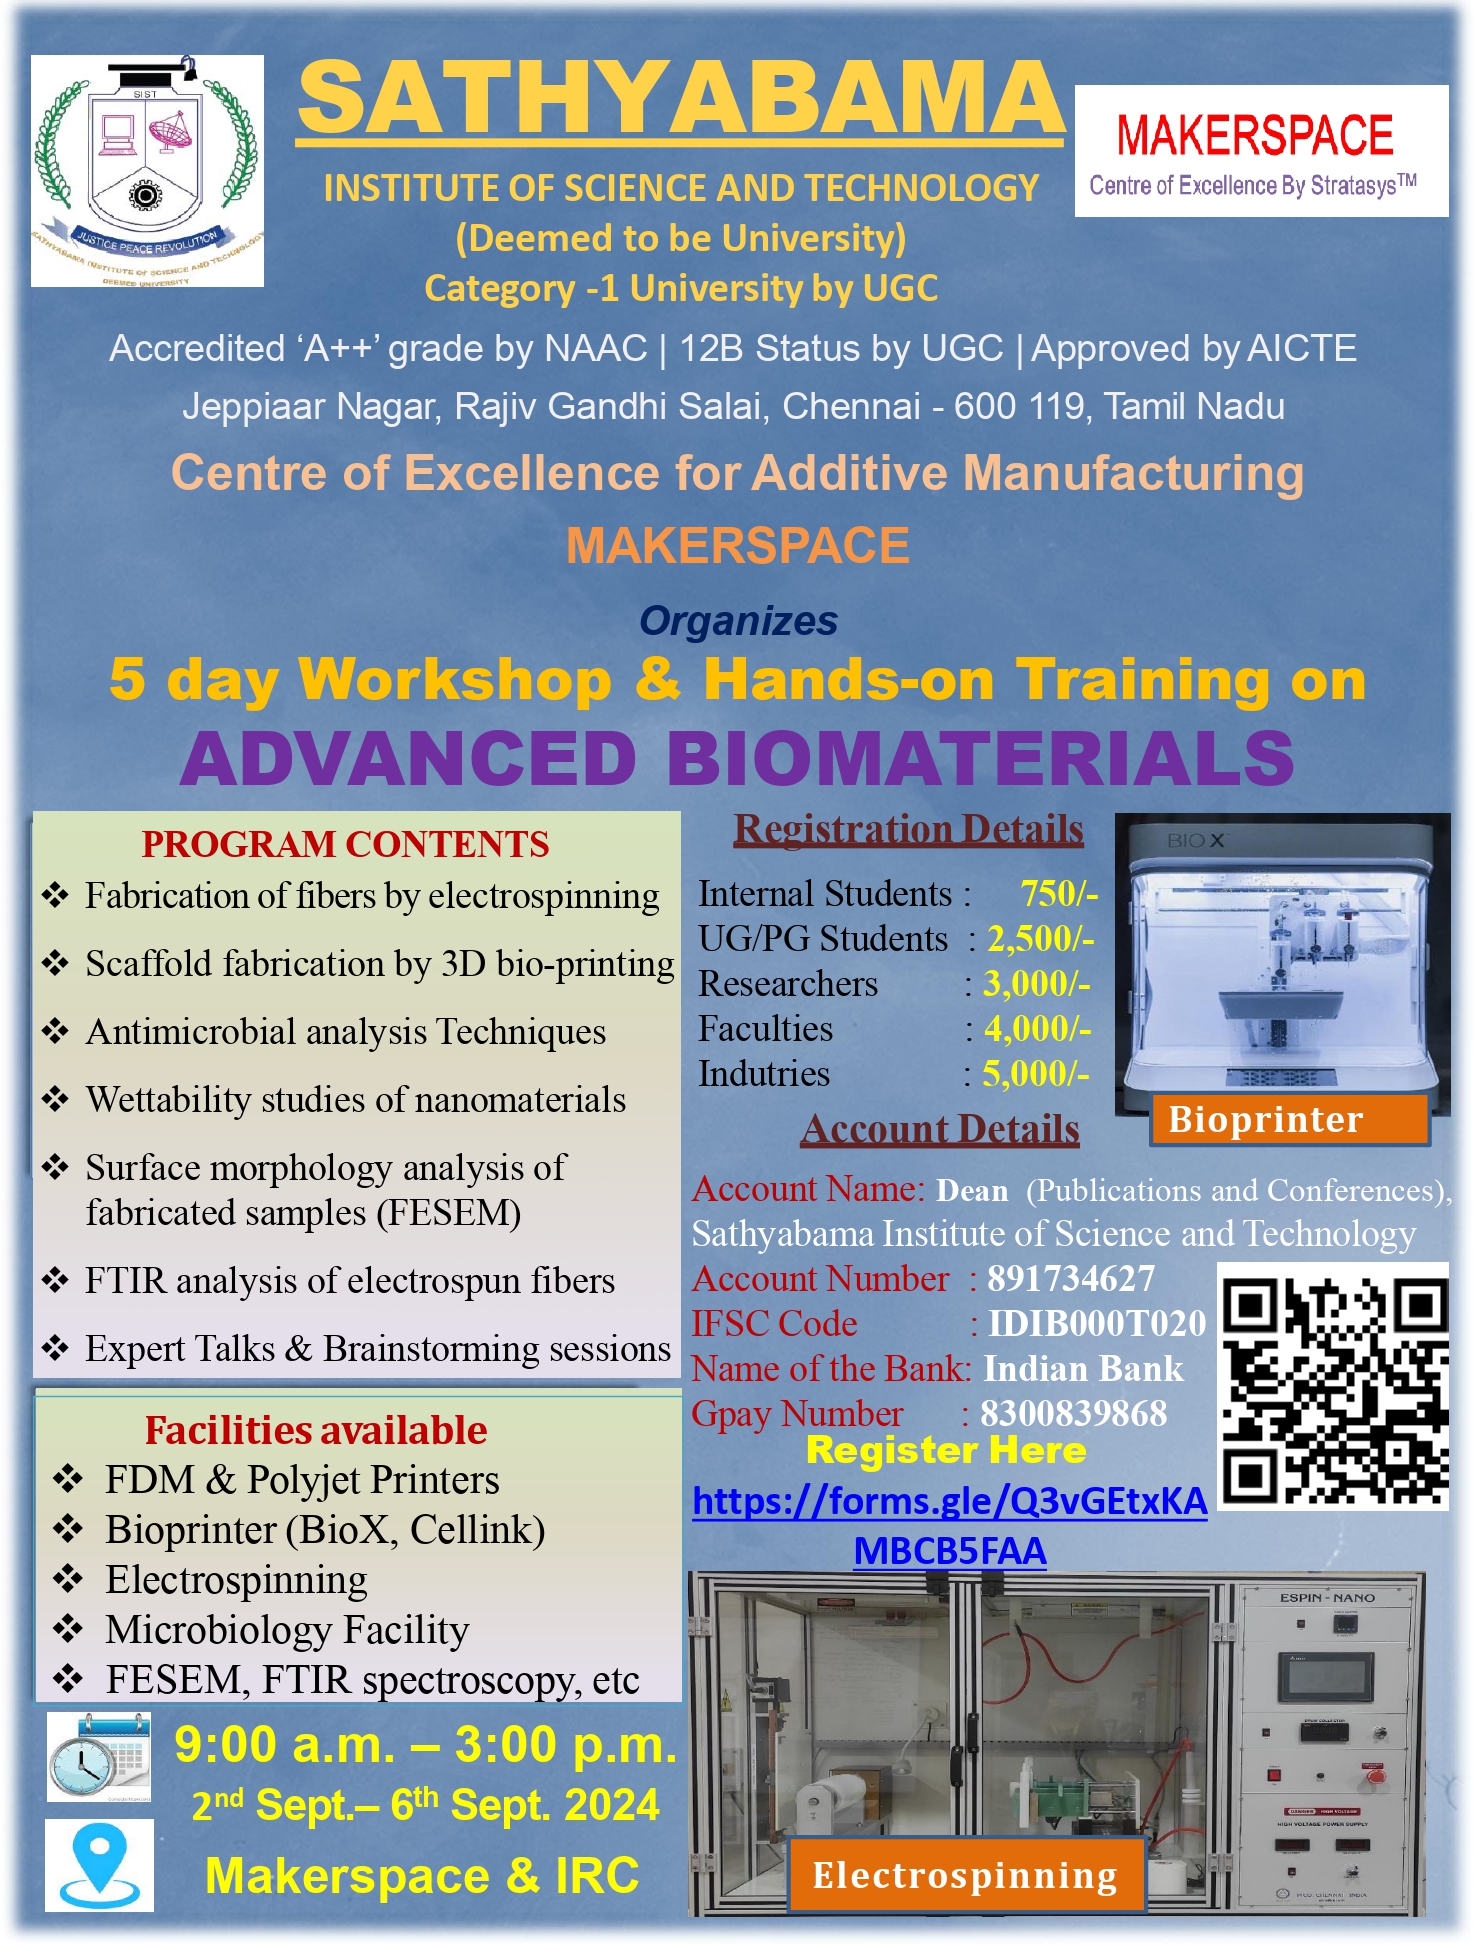 5 day Workshop & Hands-on Training on ADVANCED BIOMATERIALS